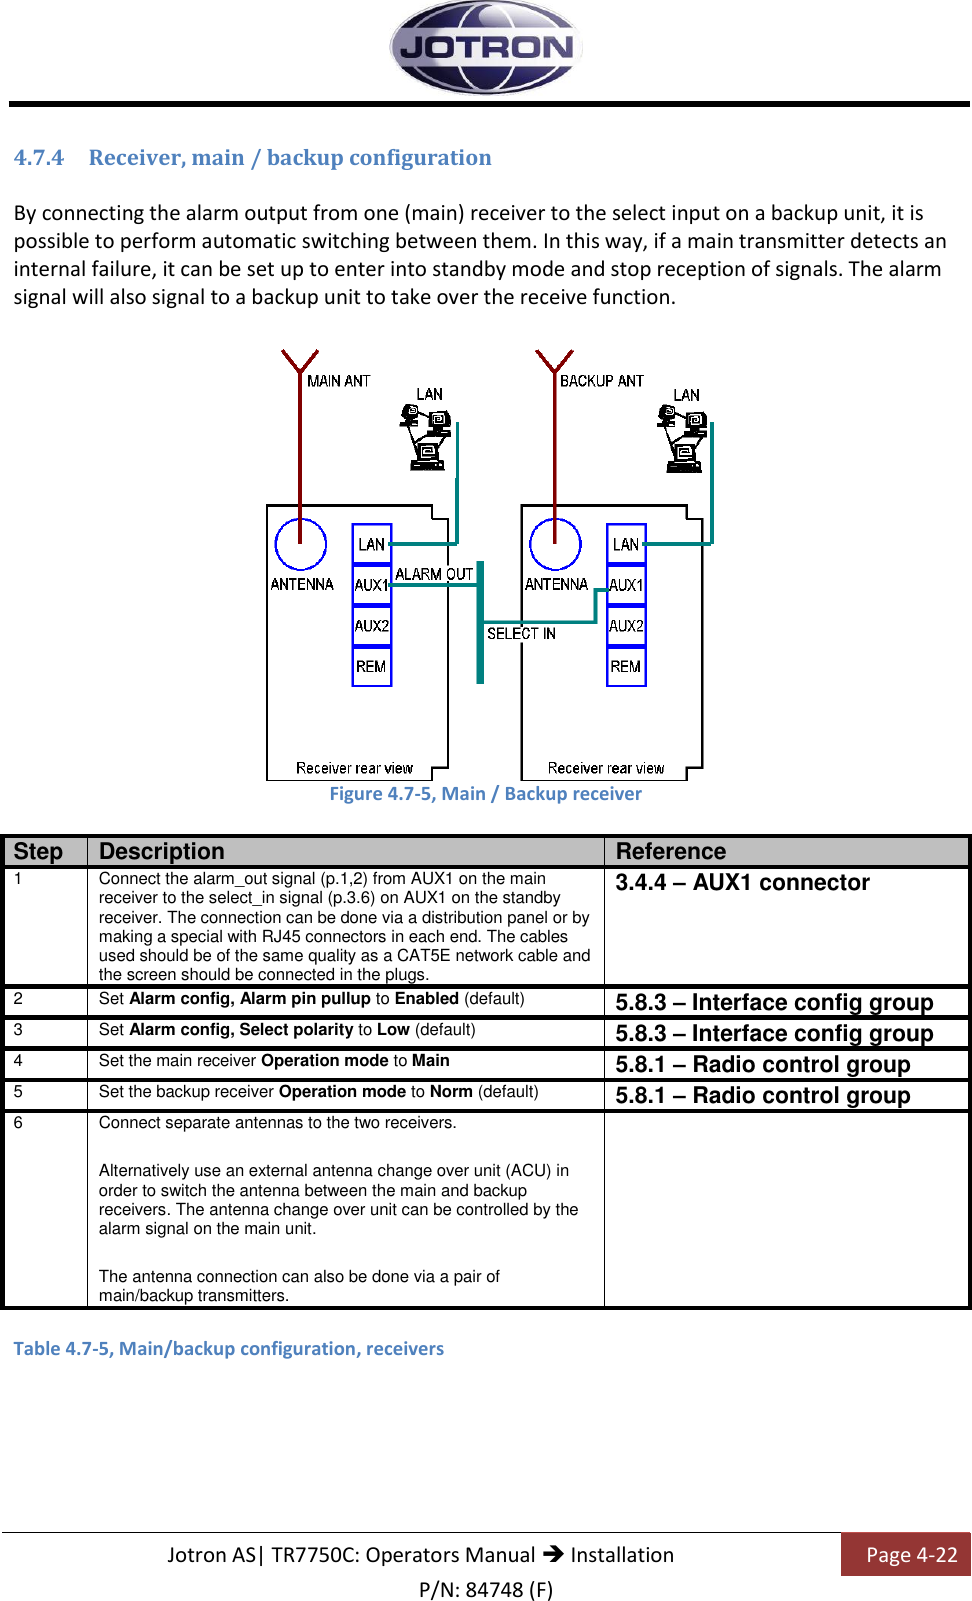   Jotron AS| TR7750C: Operators Manual  Installation Page 4-22 P/N: 84748 (F) 4.7.4 Receiver, main / backup configuration  By connecting the alarm output from one (main) receiver to the select input on a backup unit, it is possible to perform automatic switching between them. In this way, if a main transmitter detects an internal failure, it can be set up to enter into standby mode and stop reception of signals. The alarm signal will also signal to a backup unit to take over the receive function.  Figure 4.7-5, Main / Backup receiver  Step Description Reference 1 Connect the alarm_out signal (p.1,2) from AUX1 on the main receiver to the select_in signal (p.3.6) on AUX1 on the standby receiver. The connection can be done via a distribution panel or by making a special with RJ45 connectors in each end. The cables used should be of the same quality as a CAT5E network cable and the screen should be connected in the plugs. 3.4.4 – AUX1 connector 2 Set Alarm config, Alarm pin pullup to Enabled (default) 5.8.3 – Interface config group 3 Set Alarm config, Select polarity to Low (default) 5.8.3 – Interface config group 4 Set the main receiver Operation mode to Main  5.8.1 – Radio control group 5 Set the backup receiver Operation mode to Norm (default) 5.8.1 – Radio control group 6 Connect separate antennas to the two receivers. Alternatively use an external antenna change over unit (ACU) in order to switch the antenna between the main and backup receivers. The antenna change over unit can be controlled by the alarm signal on the main unit. The antenna connection can also be done via a pair of main/backup transmitters.   Table 4.7-5, Main/backup configuration, receivers  